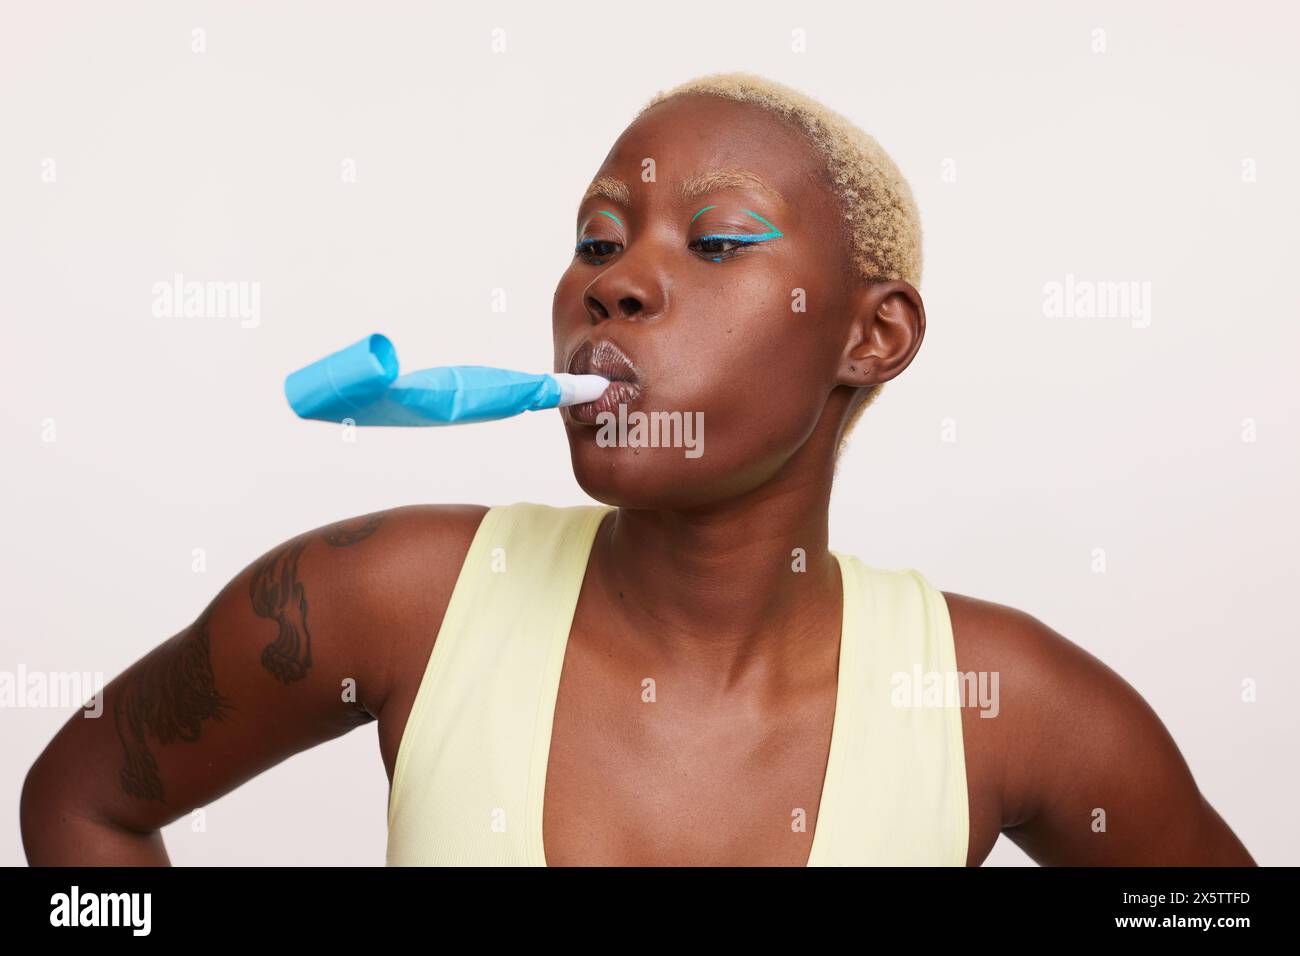 Woman with short white hair, holding party horn blower in mouth Stock Photo